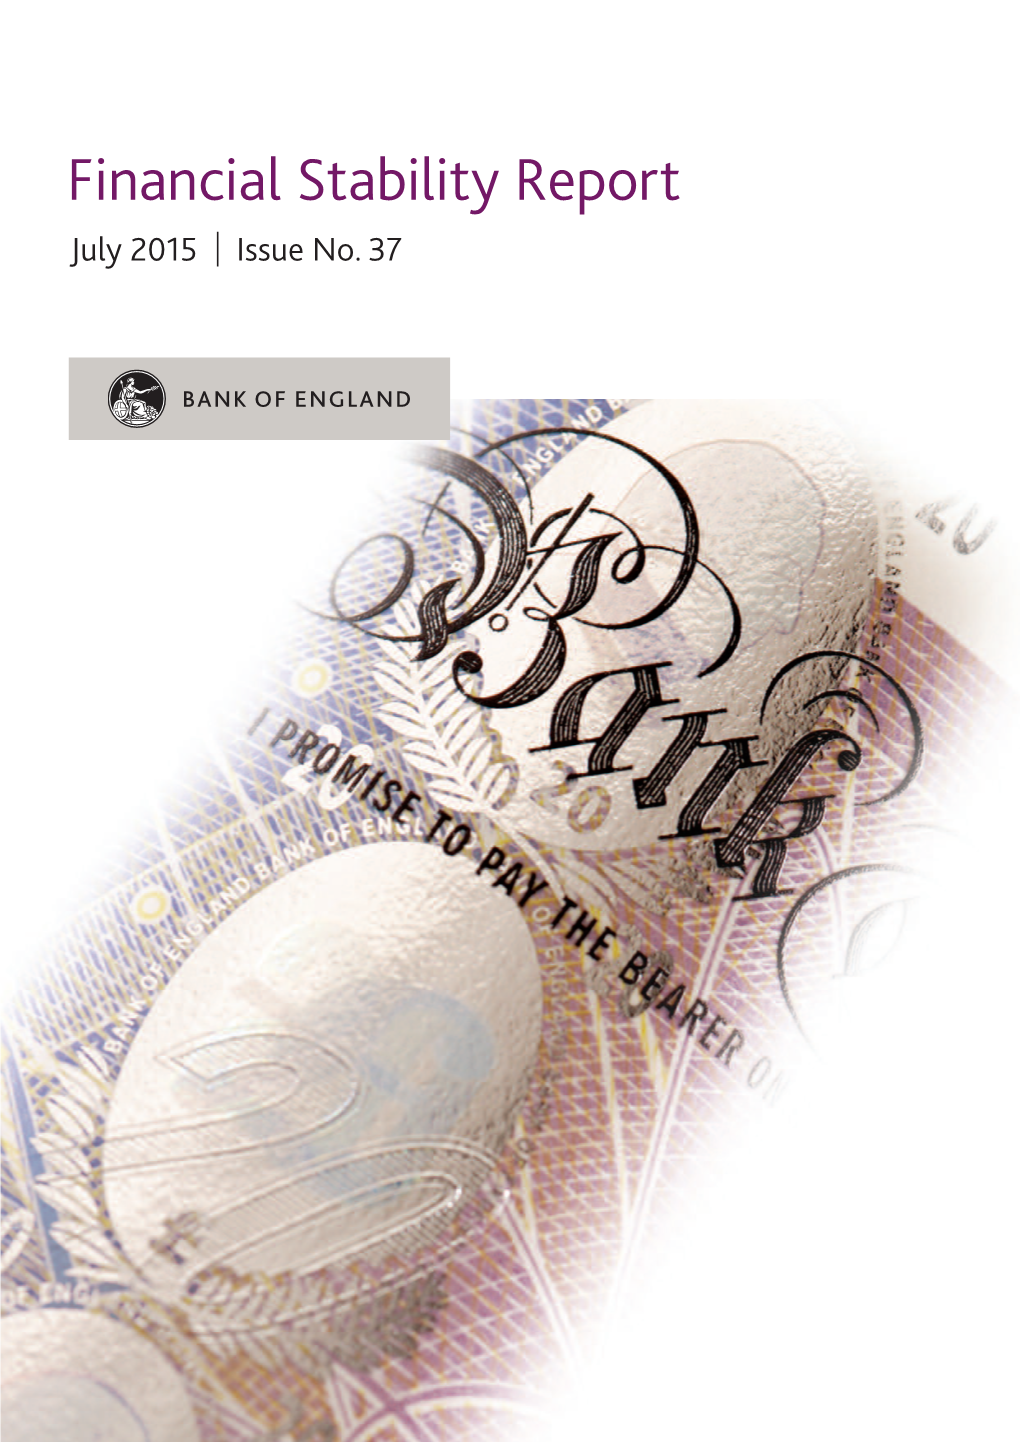 Financial Stability Report Issue 37, July 2015